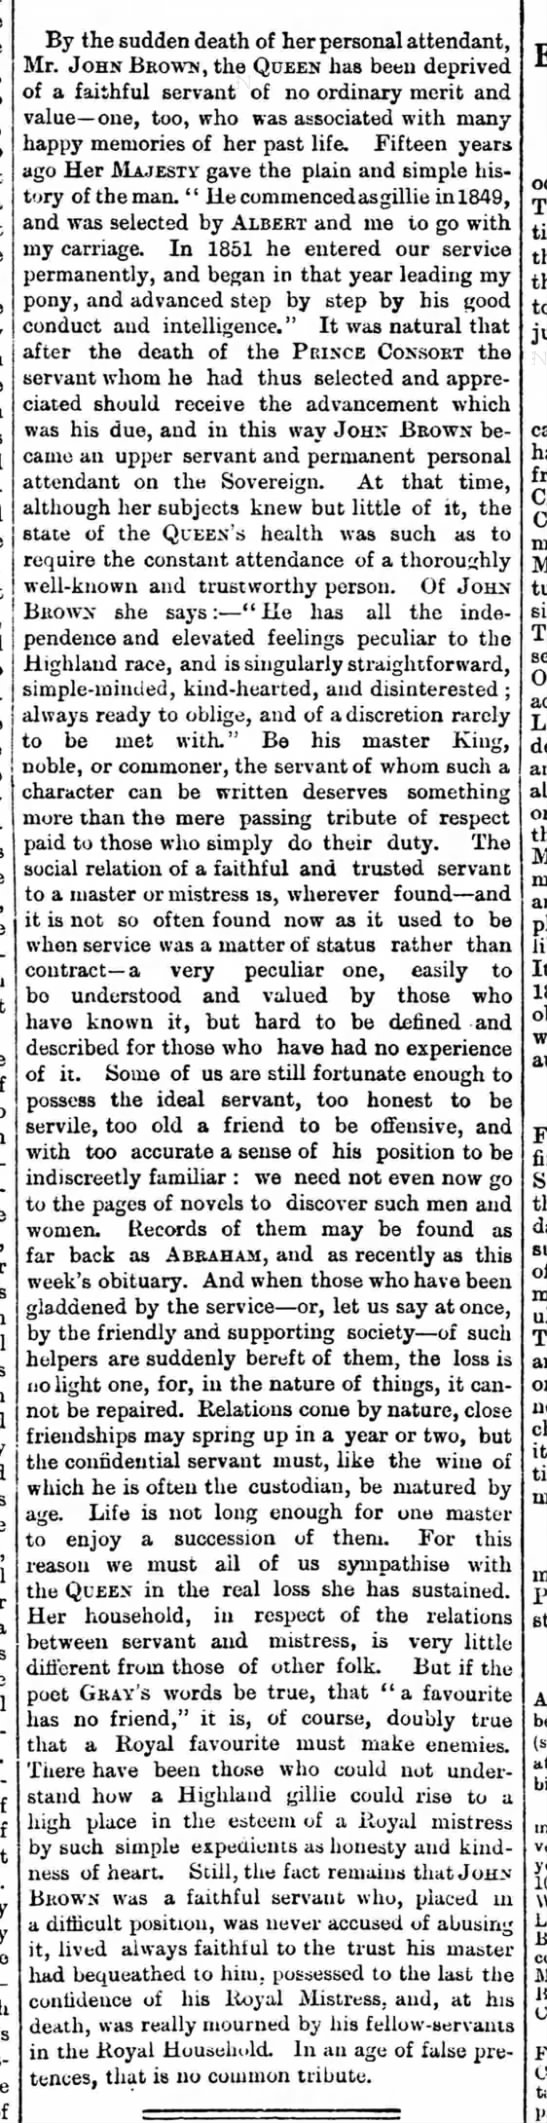 Description of Queen Victoria's close friend and attendant John Brown, after his death in 1883 - 